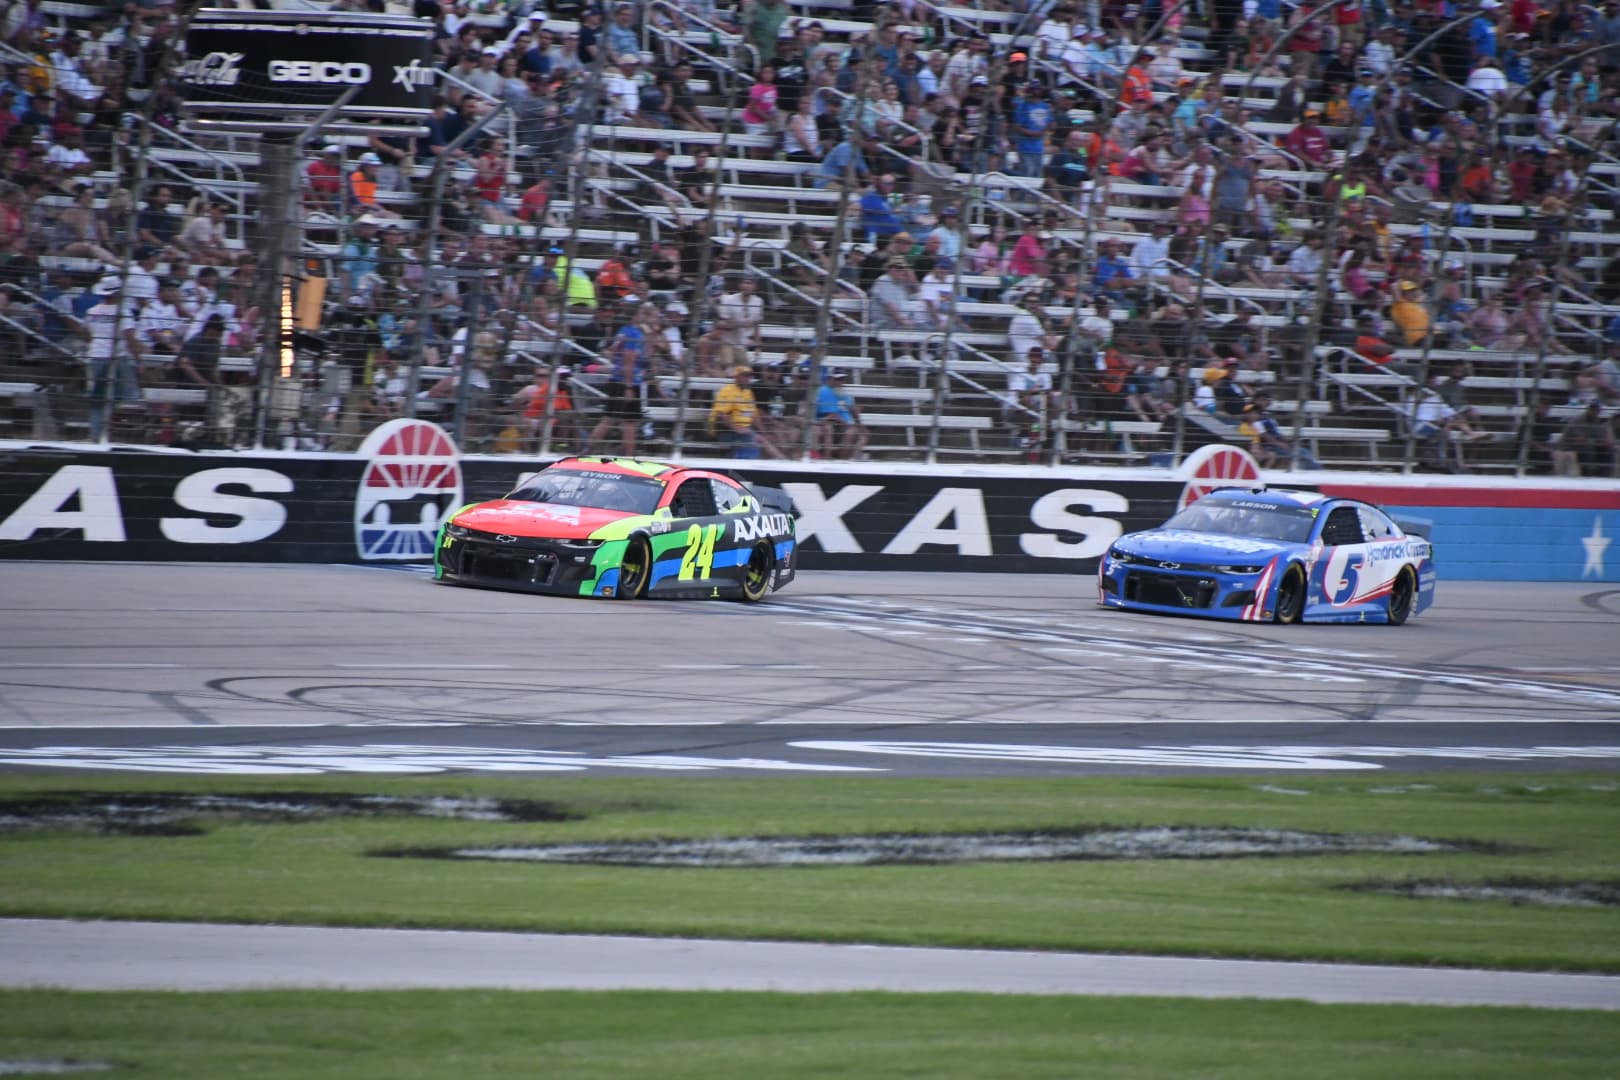 Certainly, Hendrick Motorsports looked quite strong at Texas. (Photo: Sean Folsom/The Podium Finish)